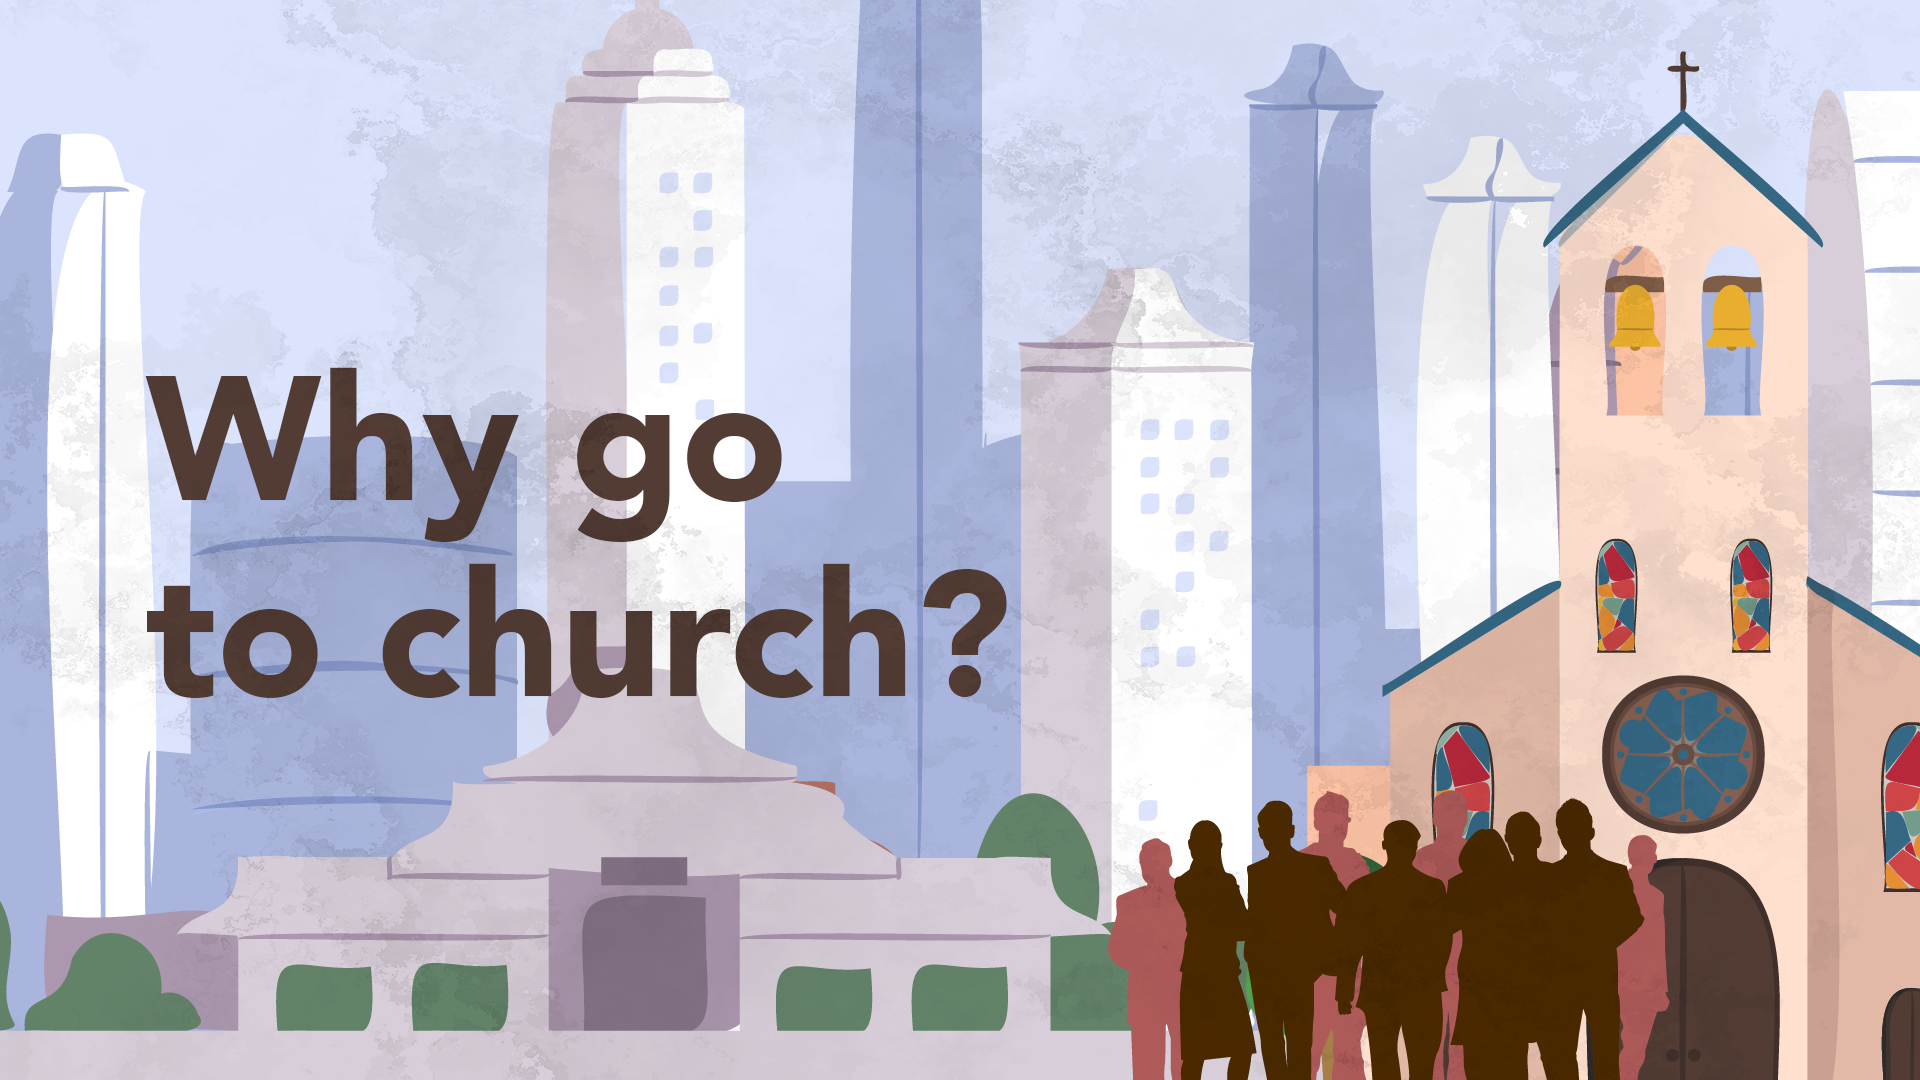 Why Should I Go to Church?